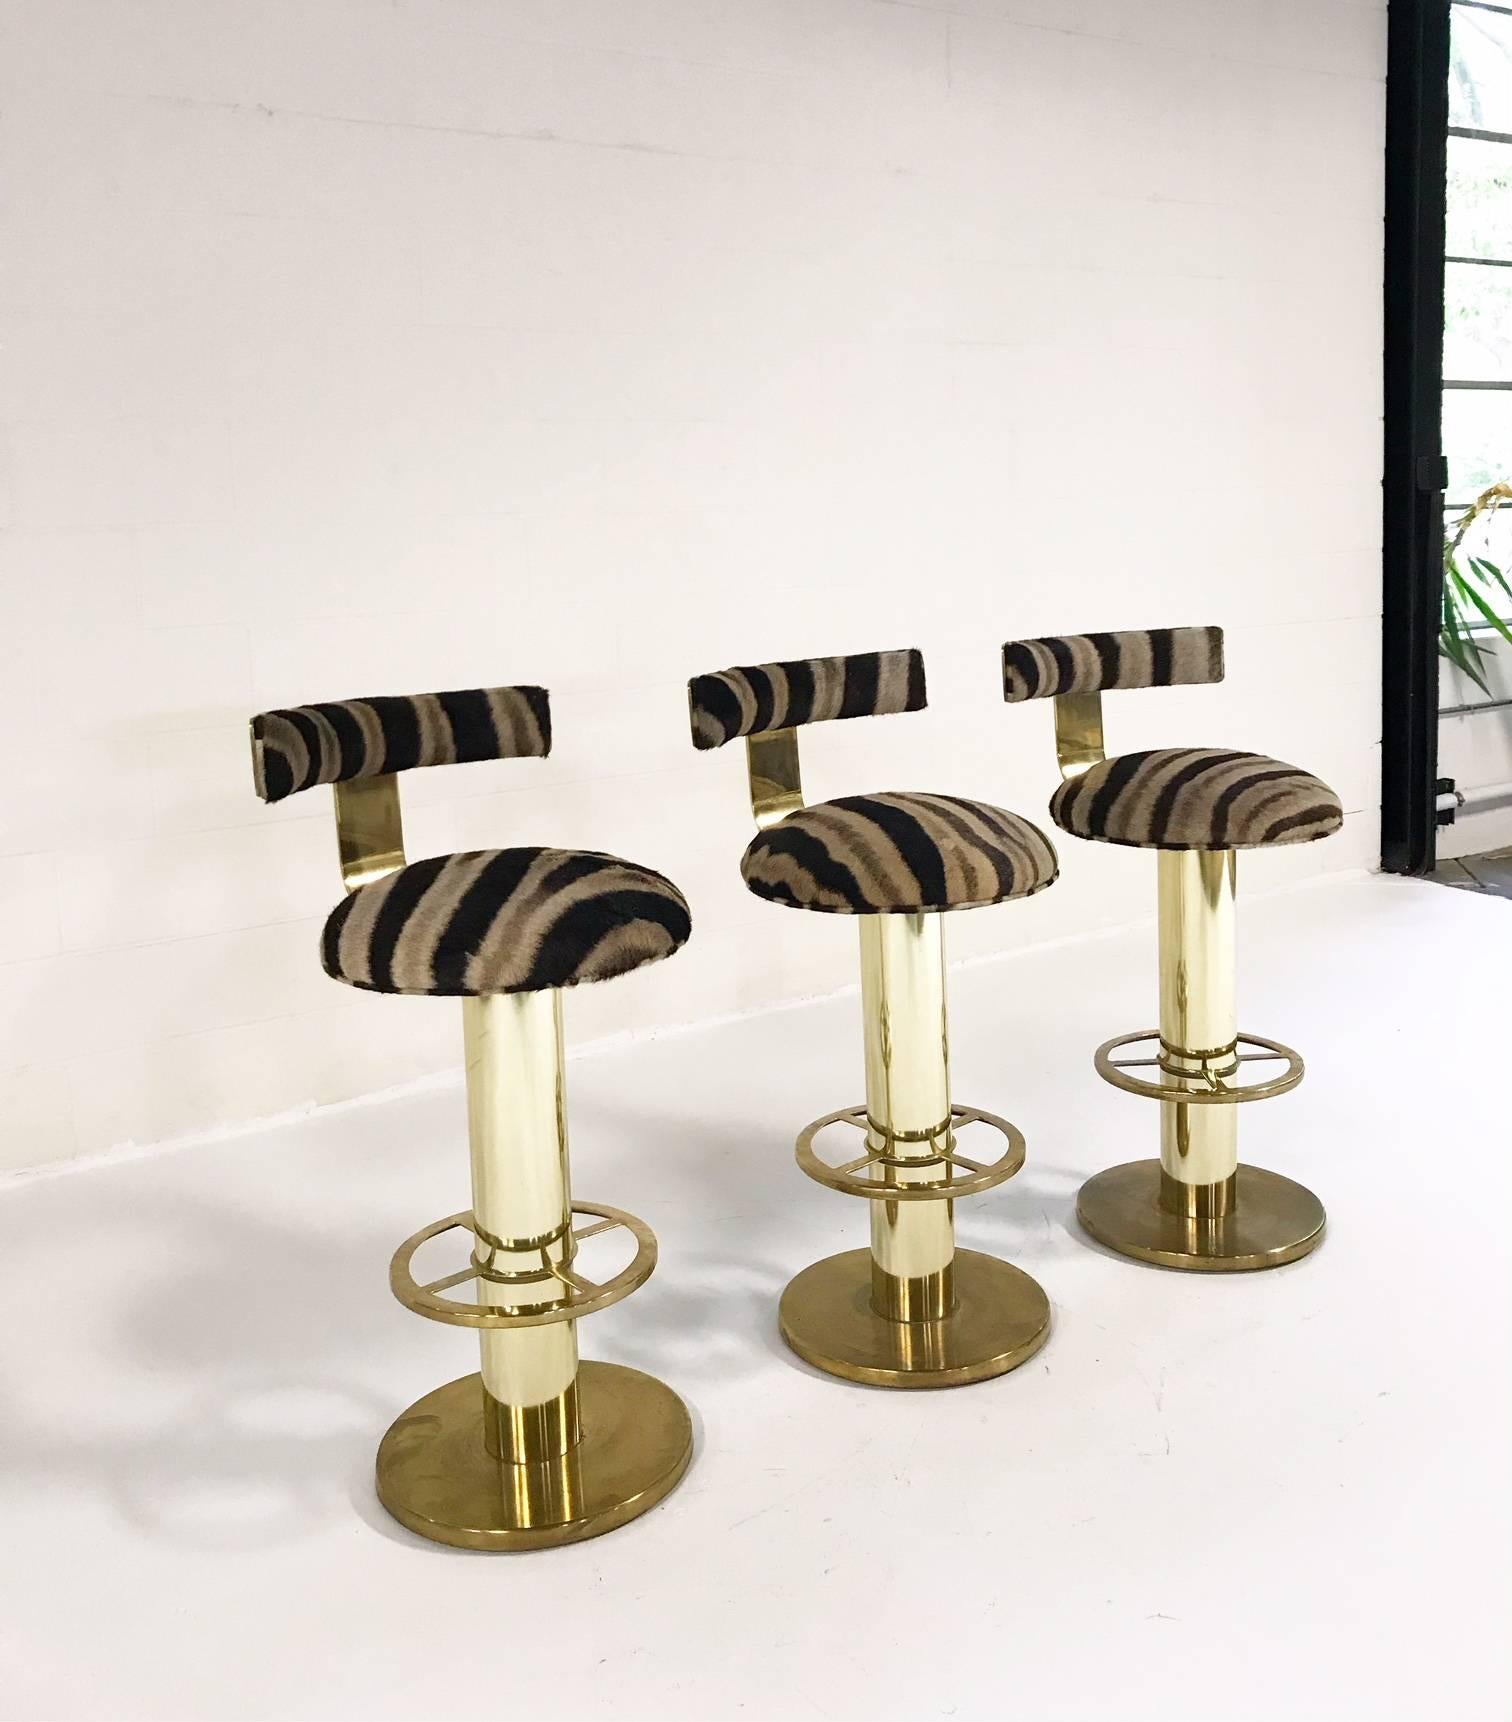 The ultimate bar stools! These one-of-a-kind Design For Leisure brass-plated bar stools are made for a rock and roll space. Completely restored in our zebra hides, these stools ooze Hollywood glam. Did we mention each ways almost 70 pounds! Damn